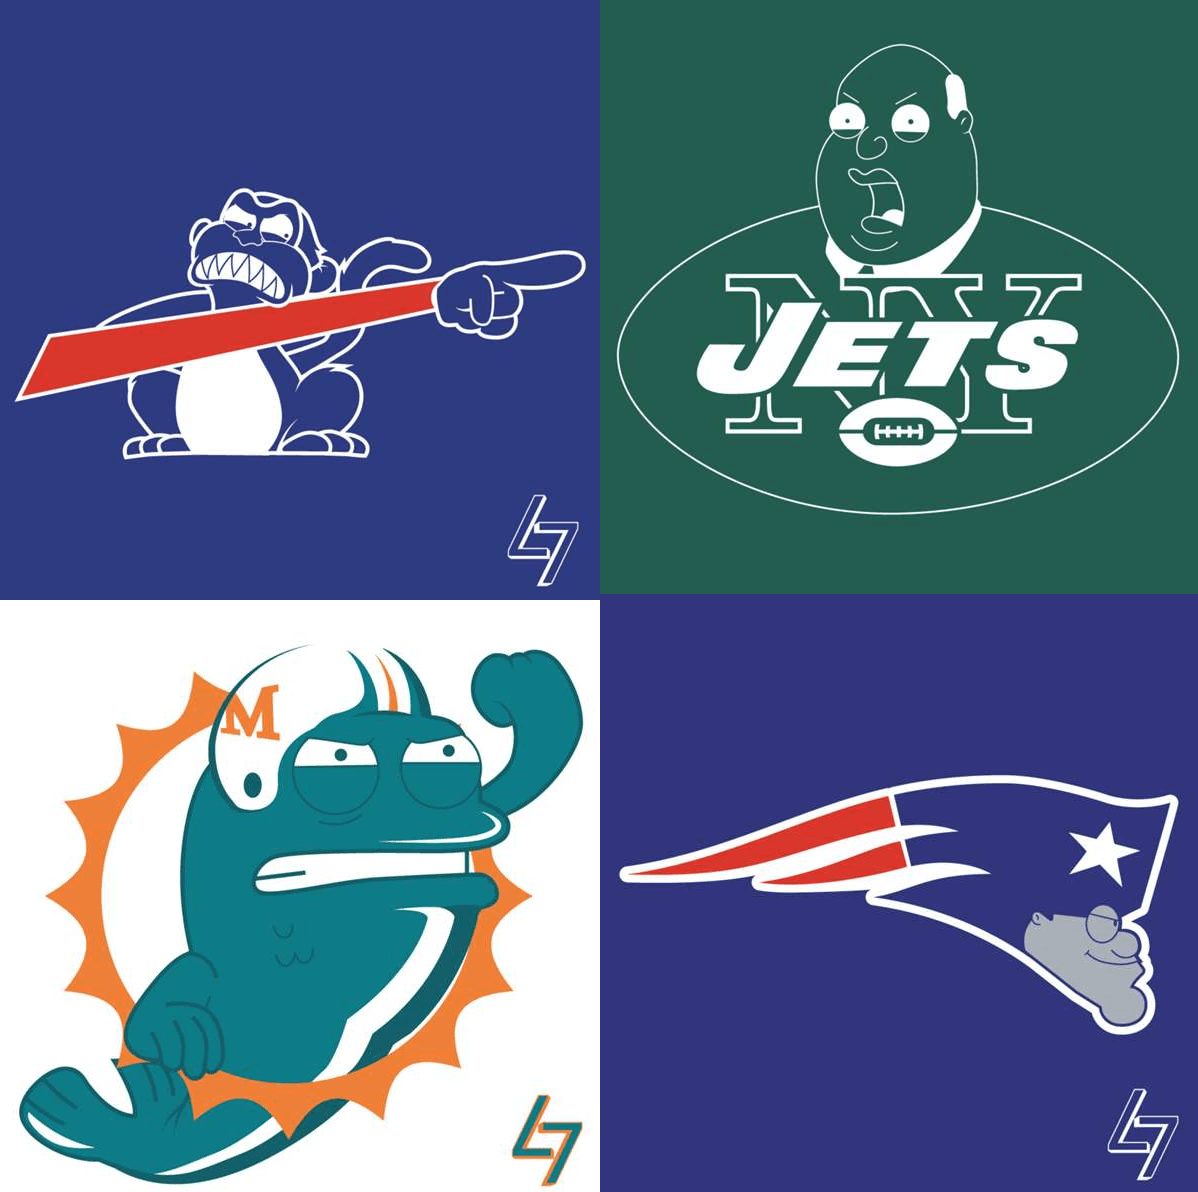 Funny NFL Logo - NFL logo mashup with Family Guy Characters